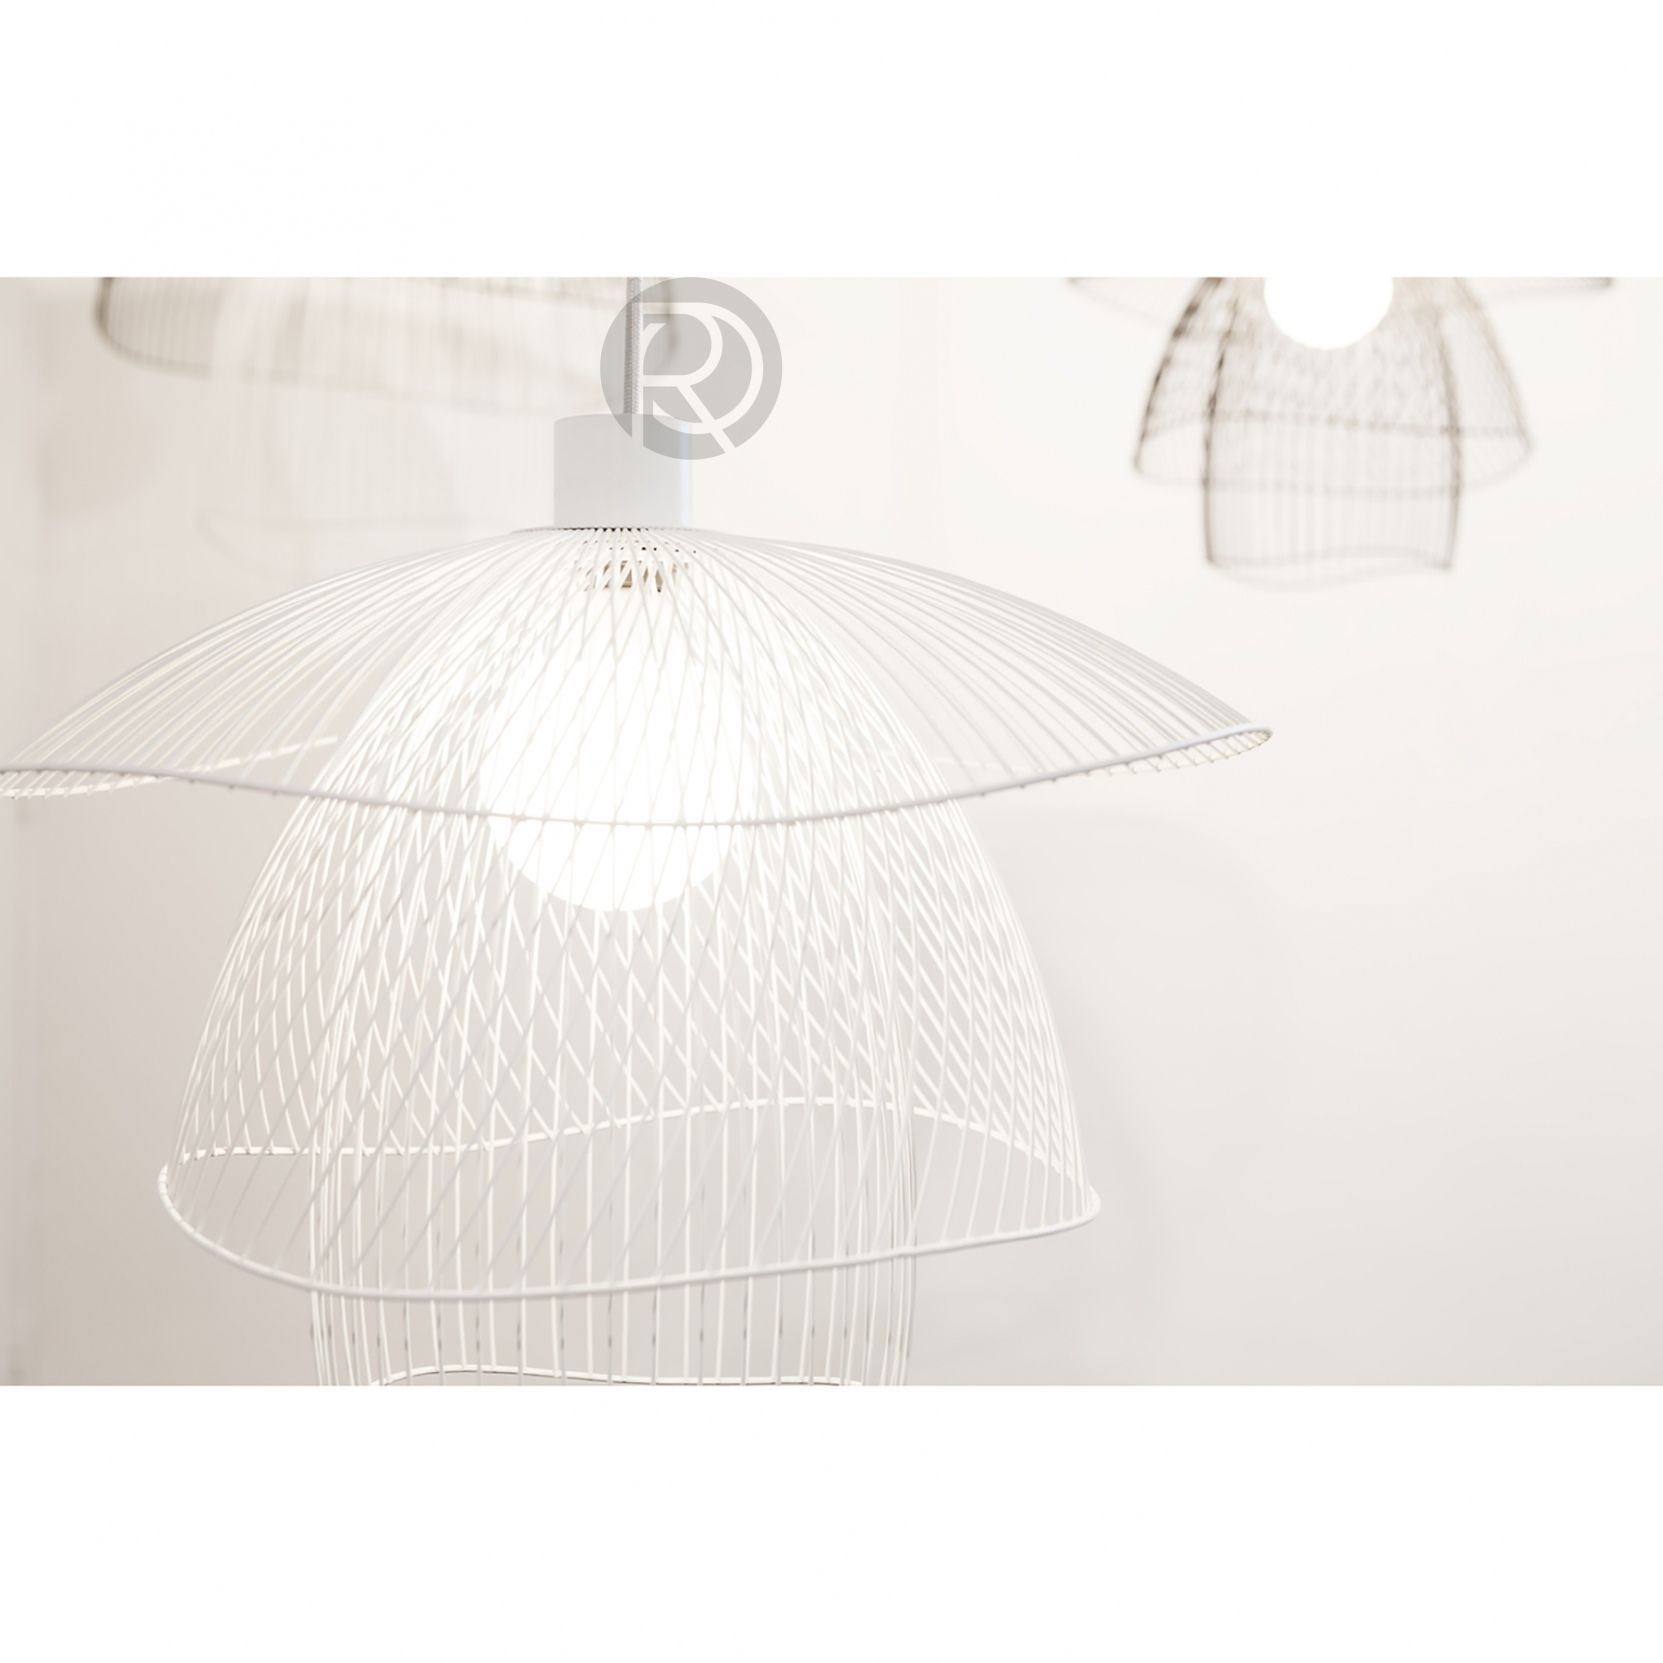 Hanging lamp PAPILLON'S by Forestier